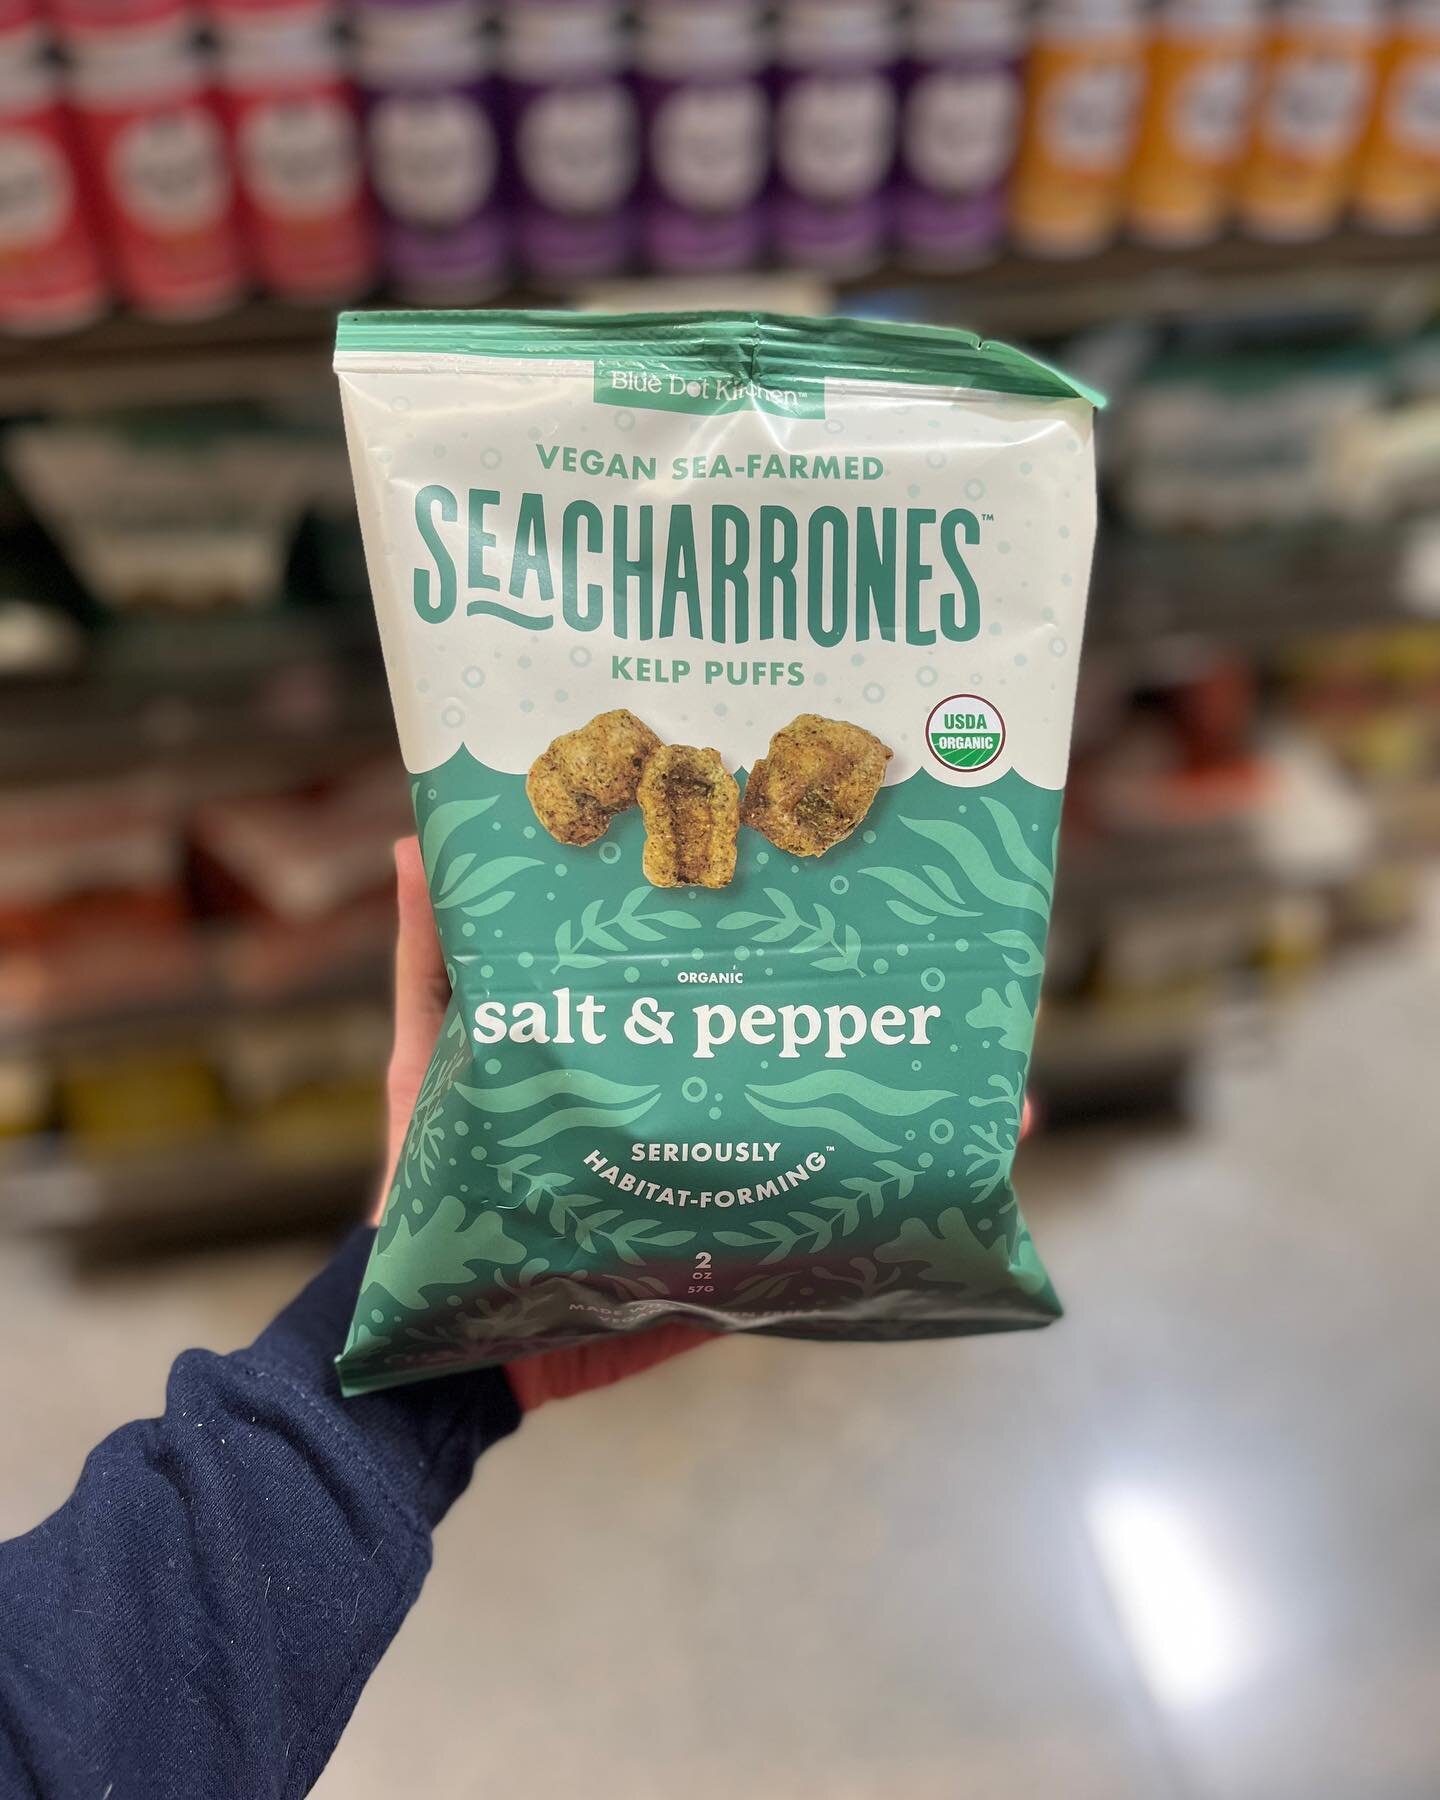 Oh heyyy, Oregonians! Seacharrones are now available all 11 @marketofchoice locations across the beautiful state of OR in all 3 signature flavors.

📍Portland, Bend, Corvallis, Ashland, Eugene, Medford, more.